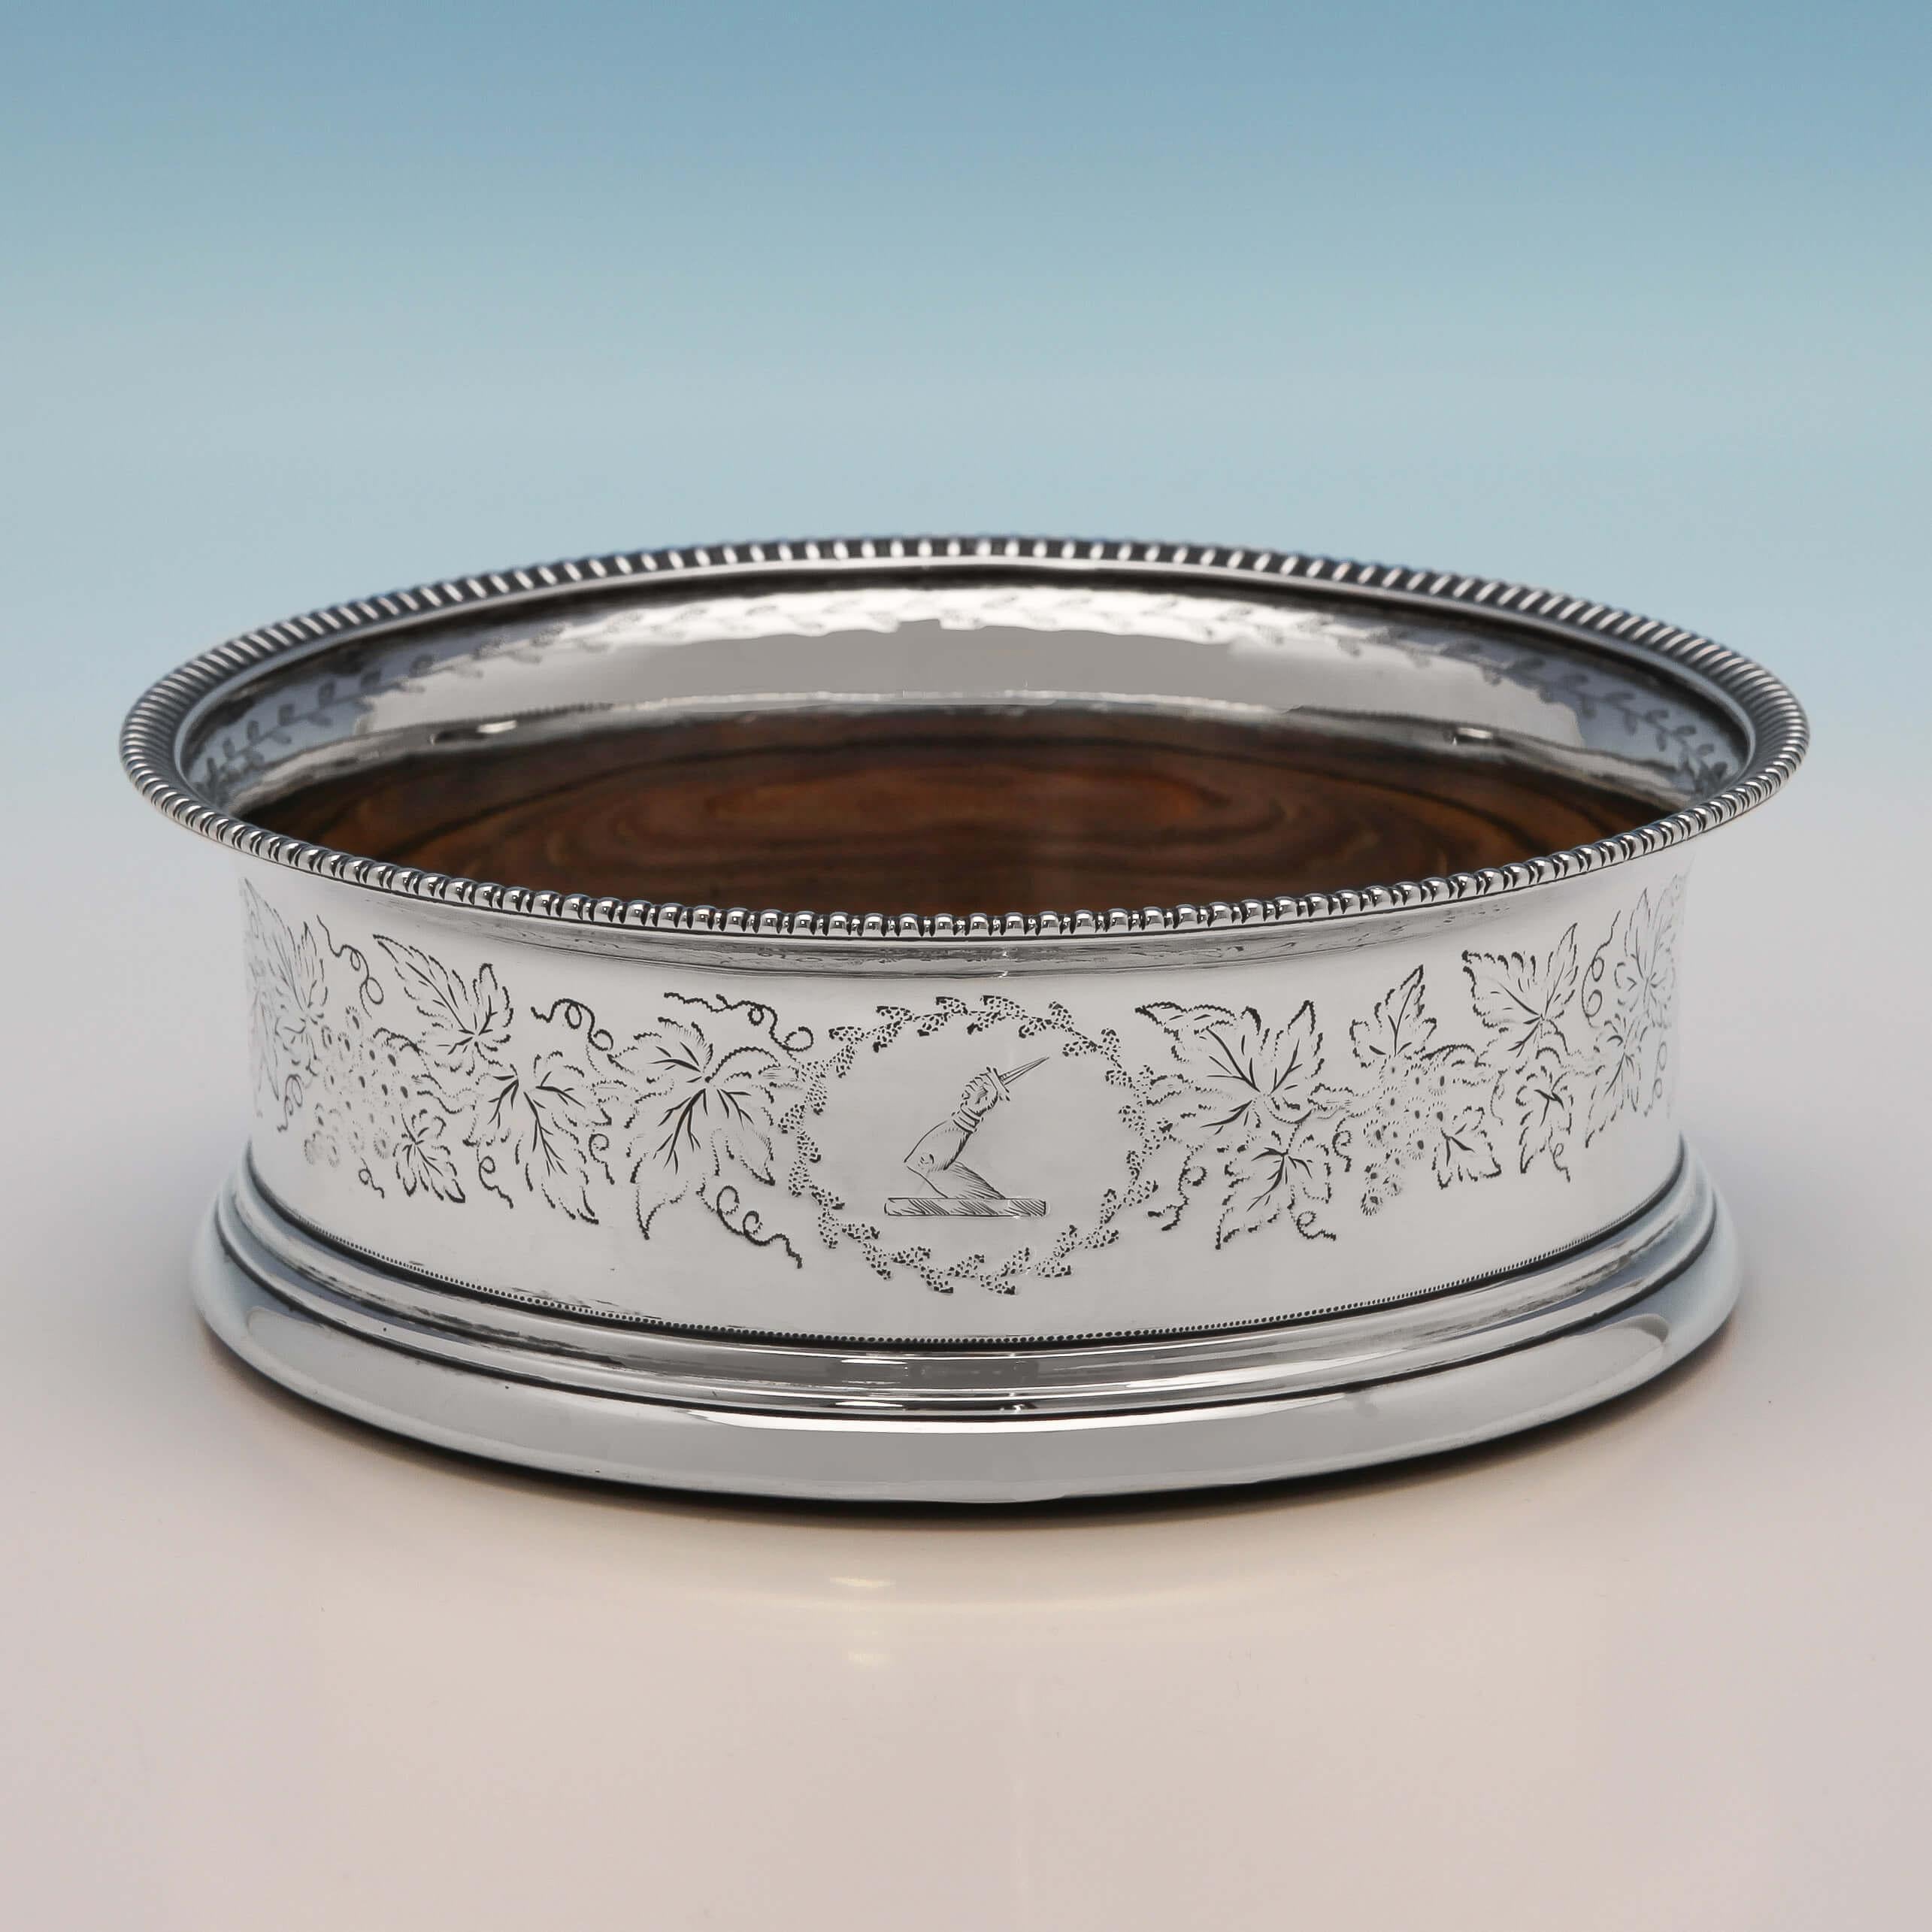 Hallmarked in London in 1804 by John Emes, this attractive pair of George III, Antique Sterling Silver Wine Coasters, feature engraved grape and vine decoration to the bodies, and gadroon borders. Each wine coaster measures 2